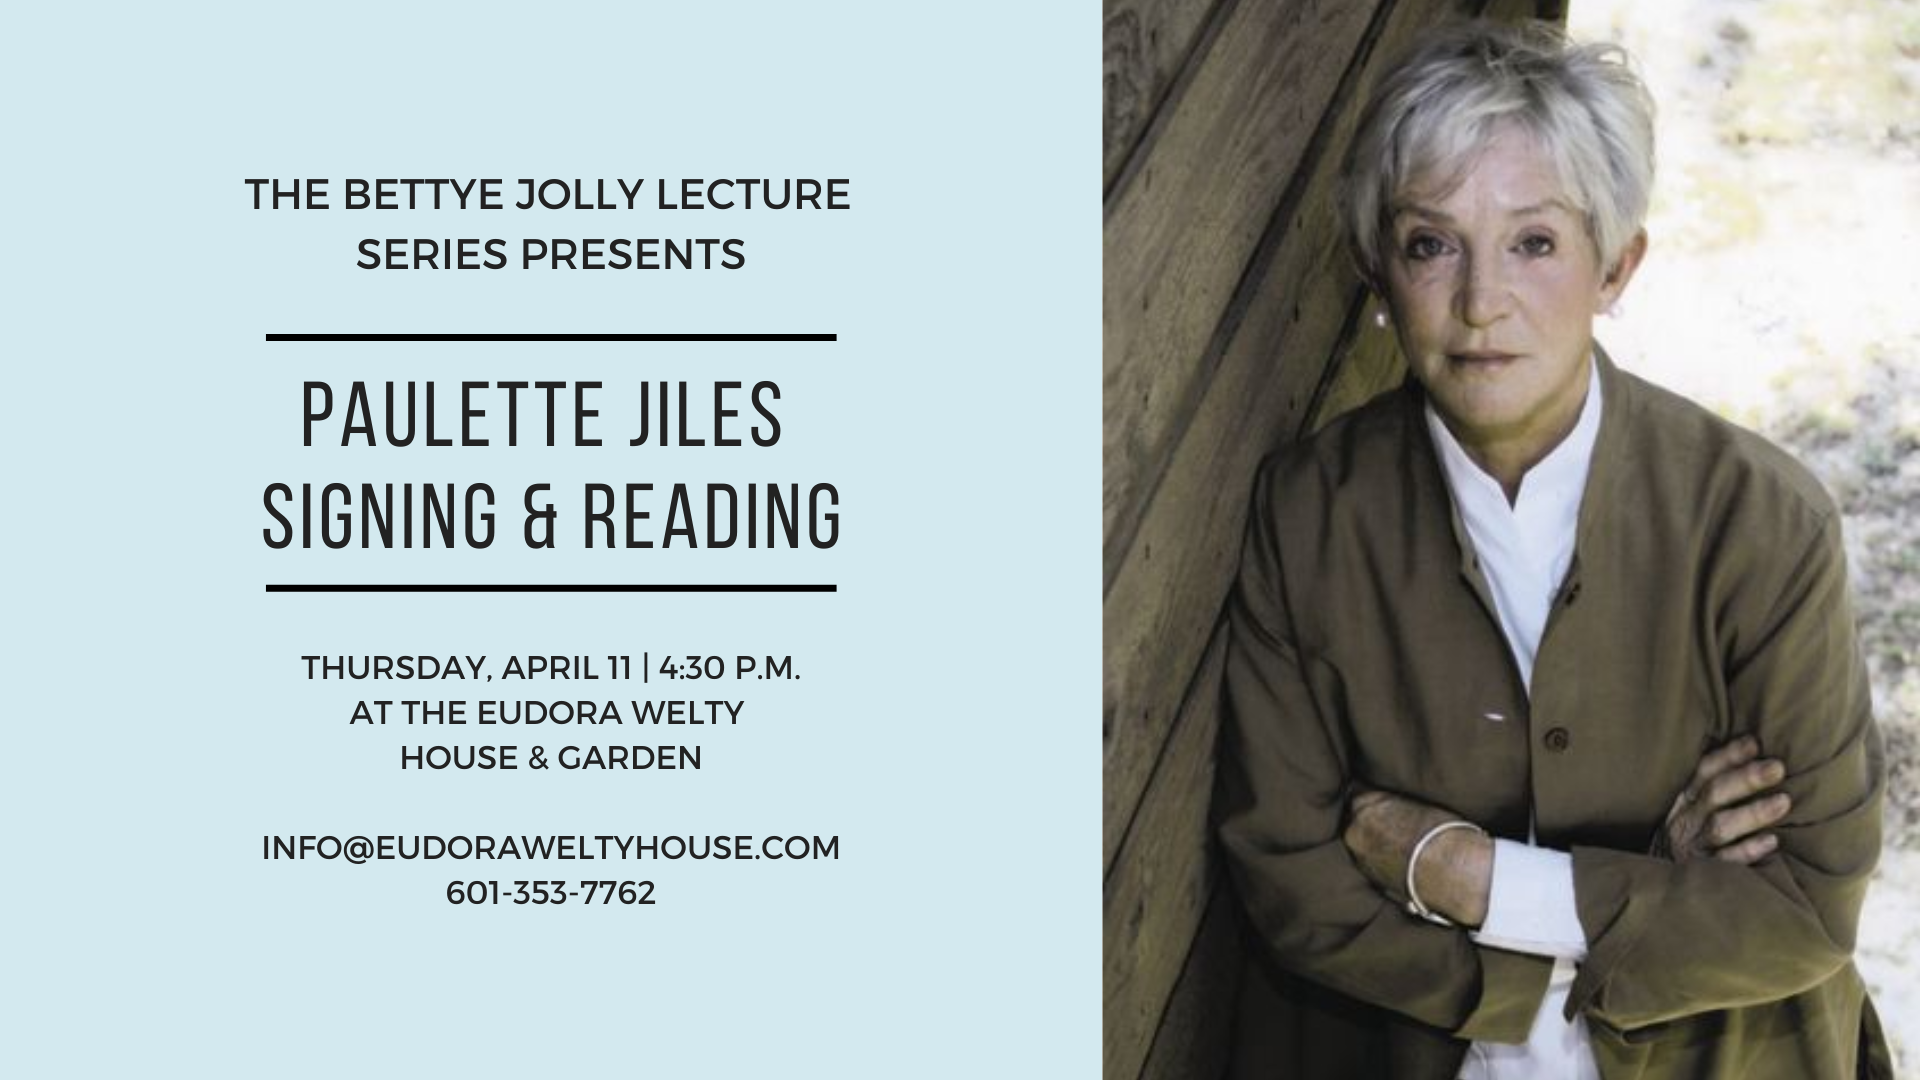 Information about Paulette Jiles delivering the Bettye Jolly Lecture on a light blue background next to a press photo of Jiles with arms crossed wearing a tan jacket